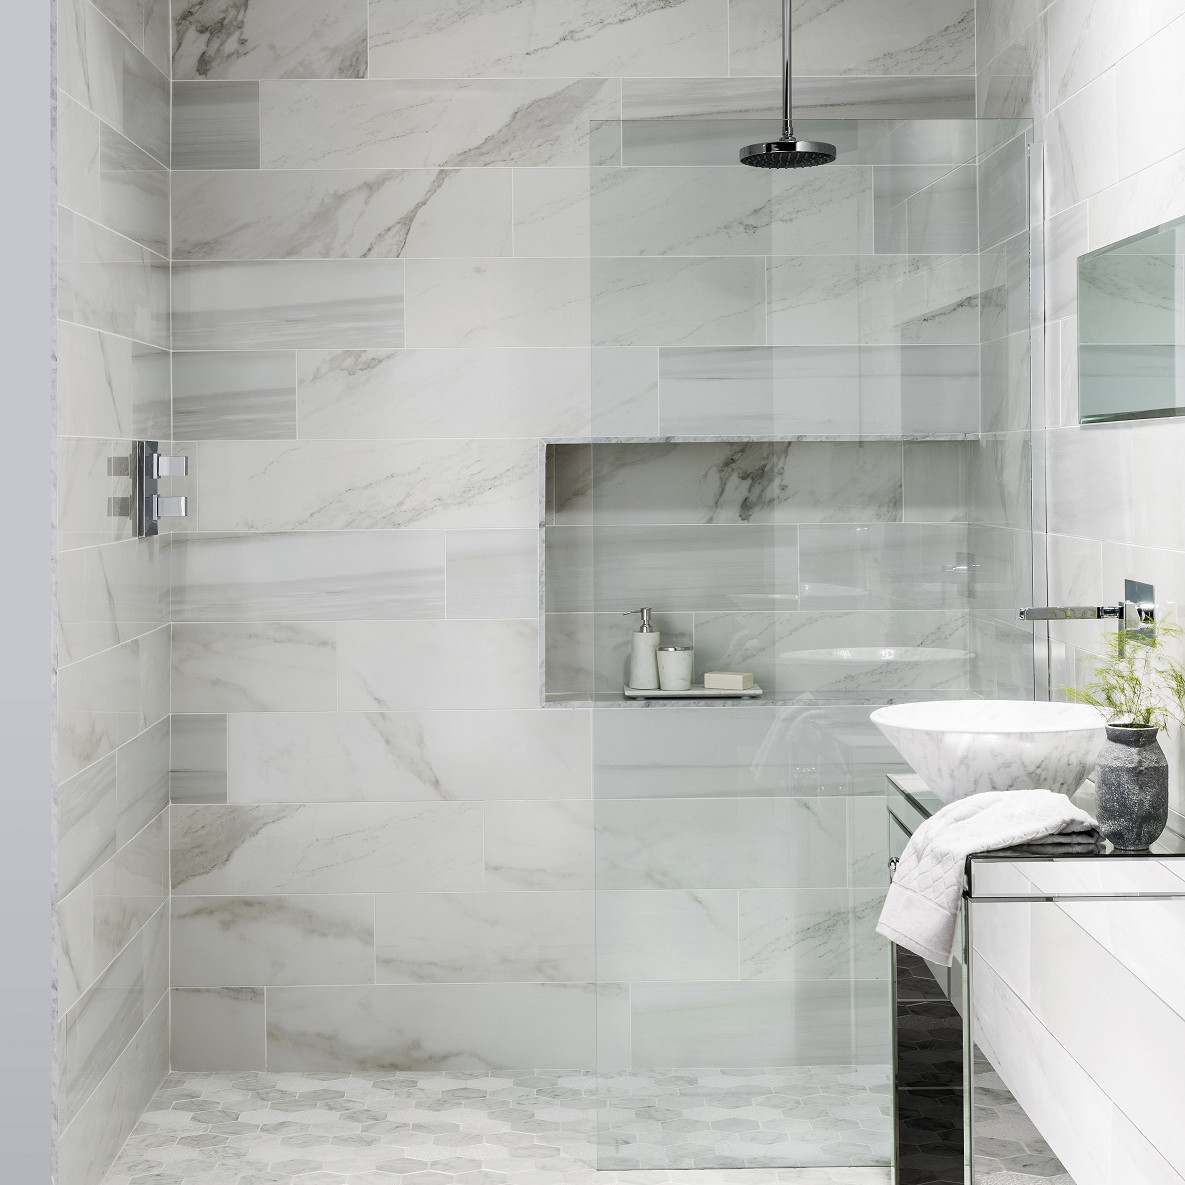 Stone Bathroom Tile
 These faux marble tiles have got everyone talking